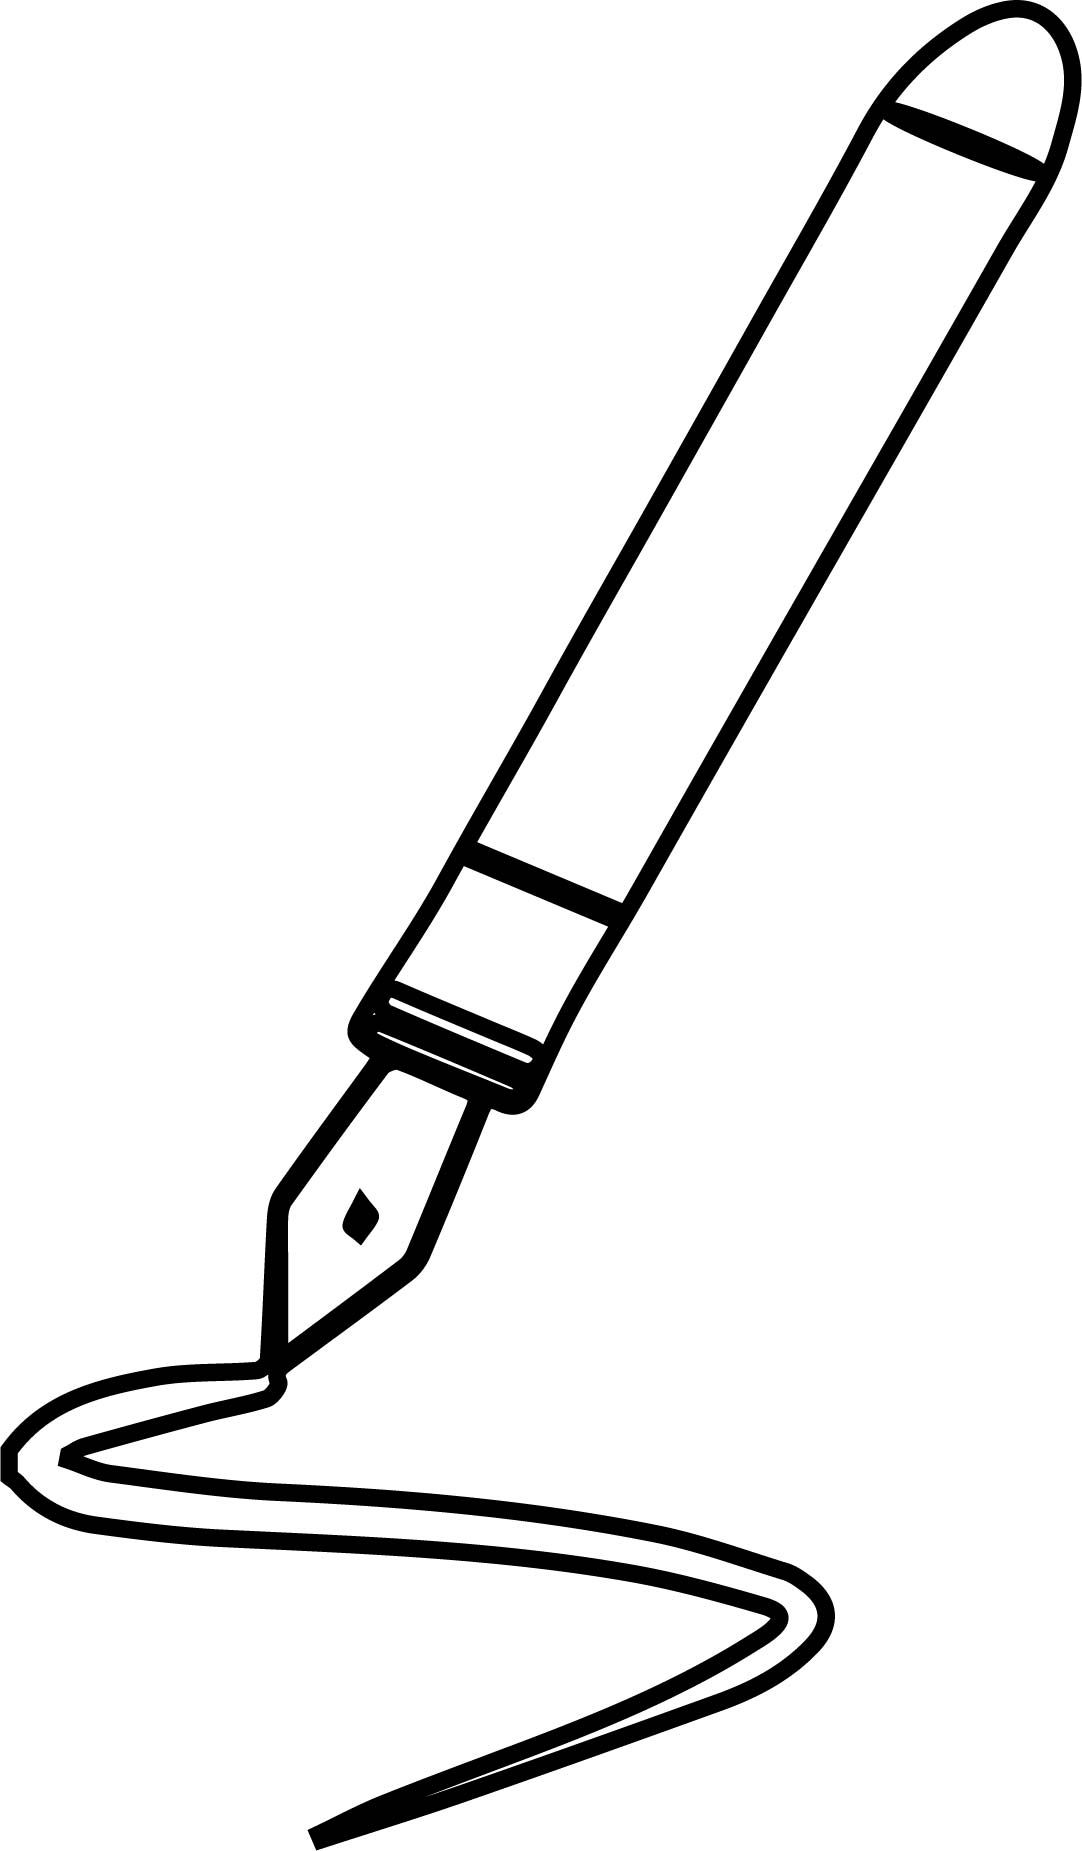 Just calligraphy pen coloring page